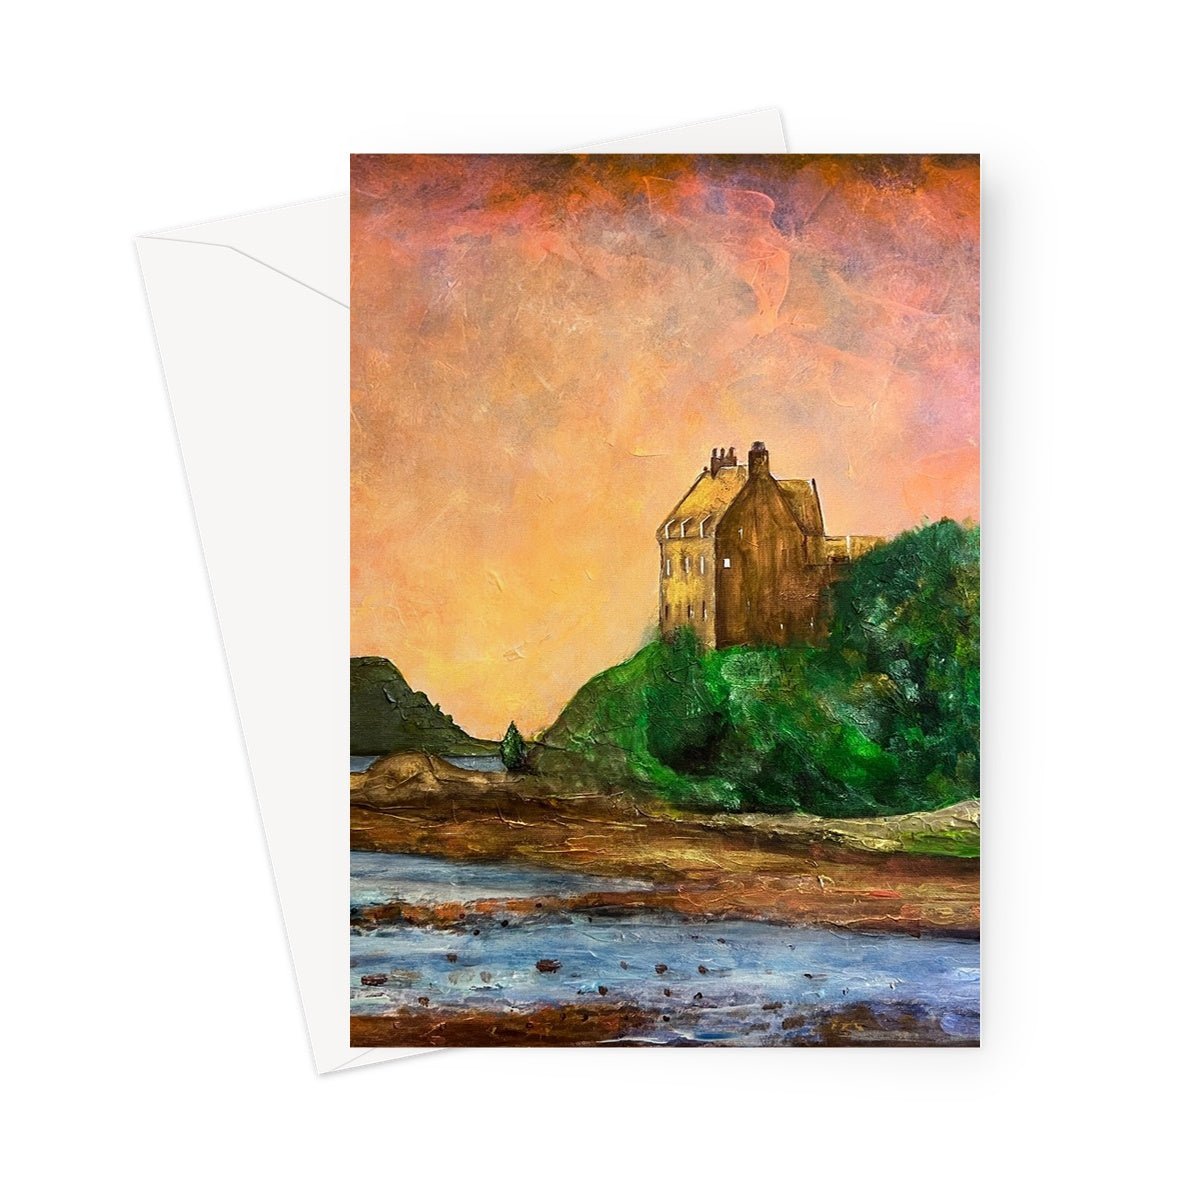 Duntrune Castle Art Gifts Greeting Card-Greetings Cards-Historic & Iconic Scotland Art Gallery-5"x7"-1 Card-Paintings, Prints, Homeware, Art Gifts From Scotland By Scottish Artist Kevin Hunter